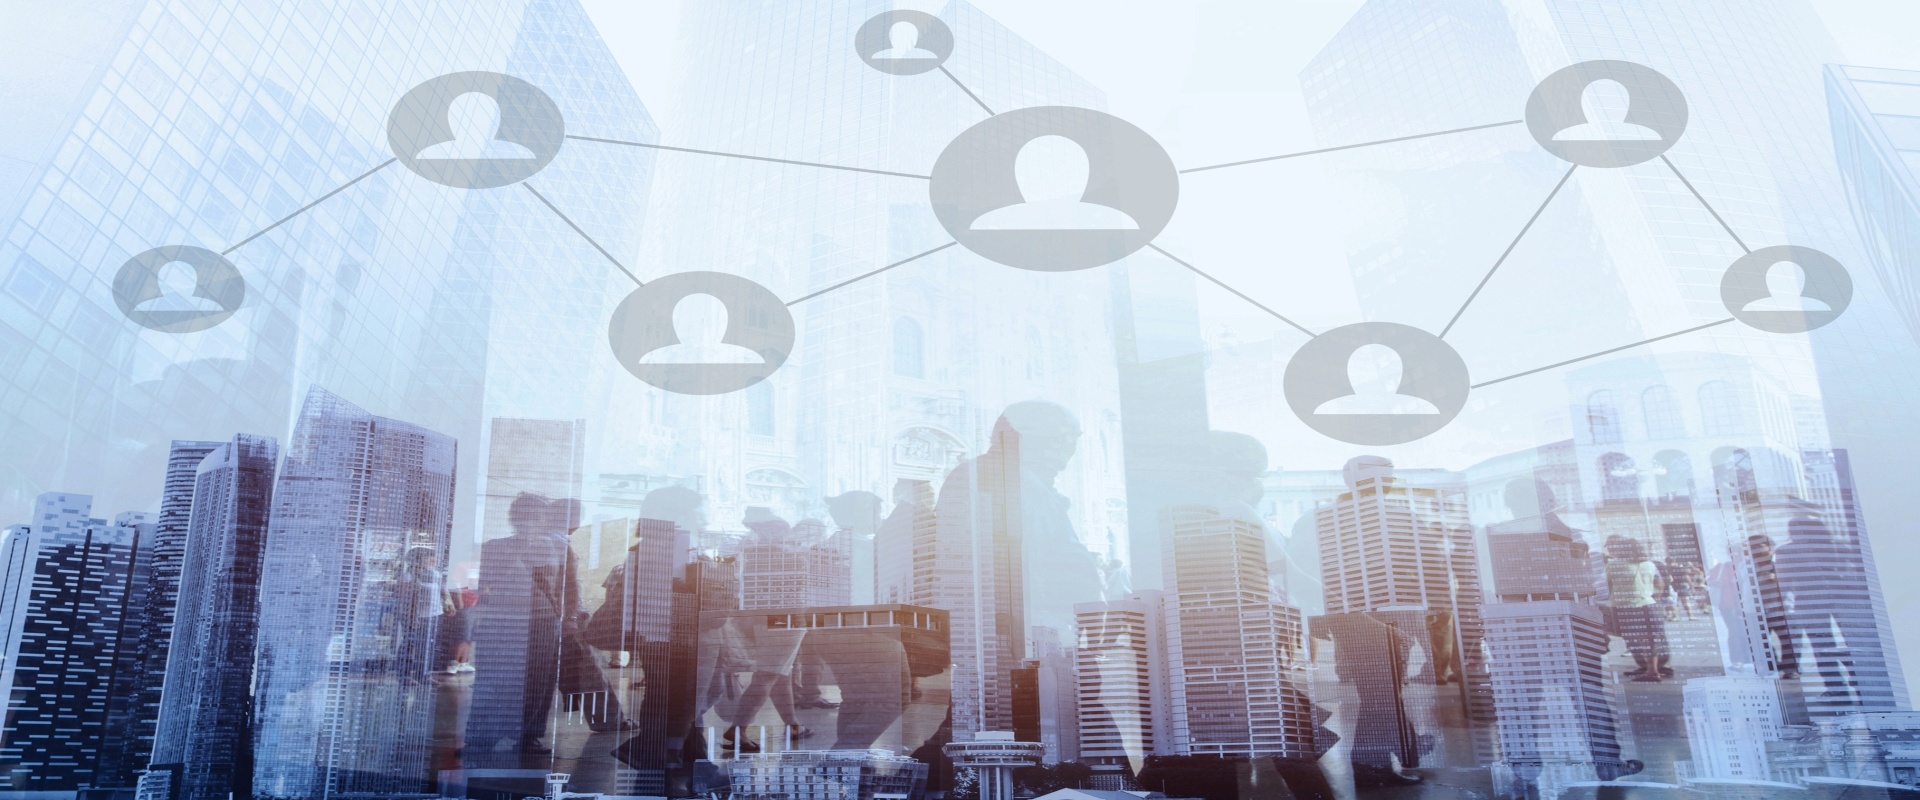 social network or business connections concept, double exposure